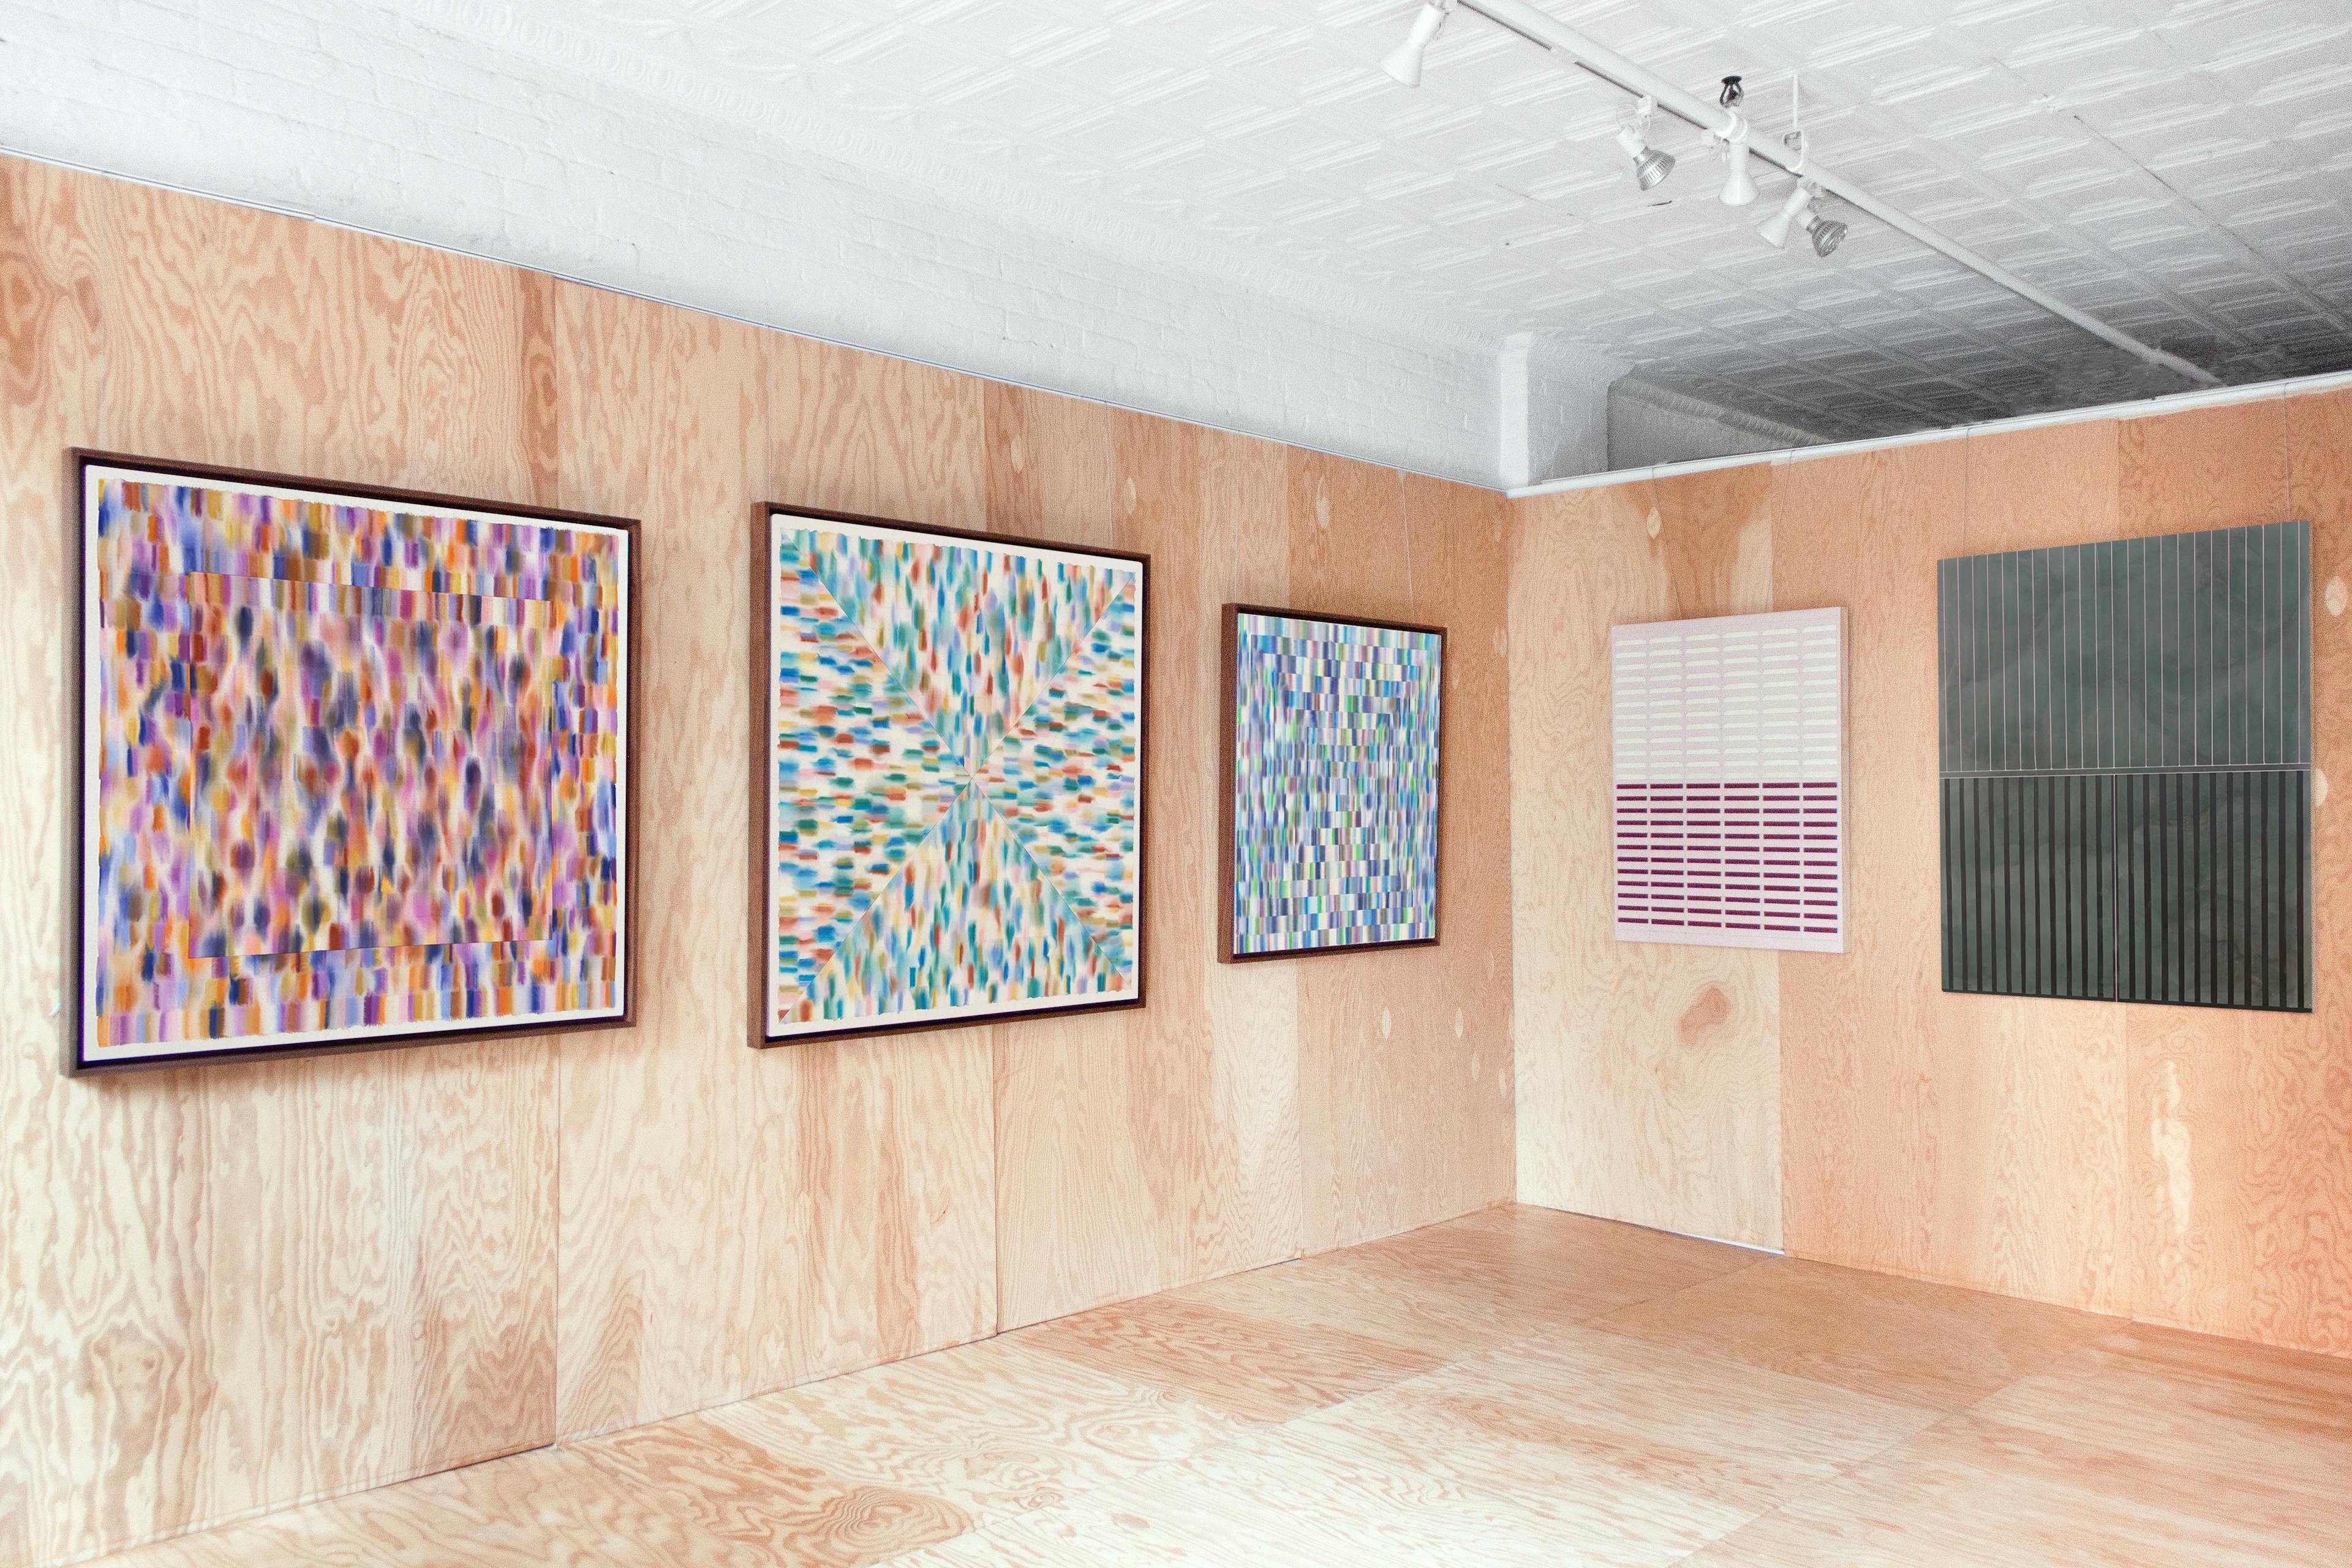 Artwork installed as part of Abscissa, one of Uprise Art's Exhibitions in New York, NY.